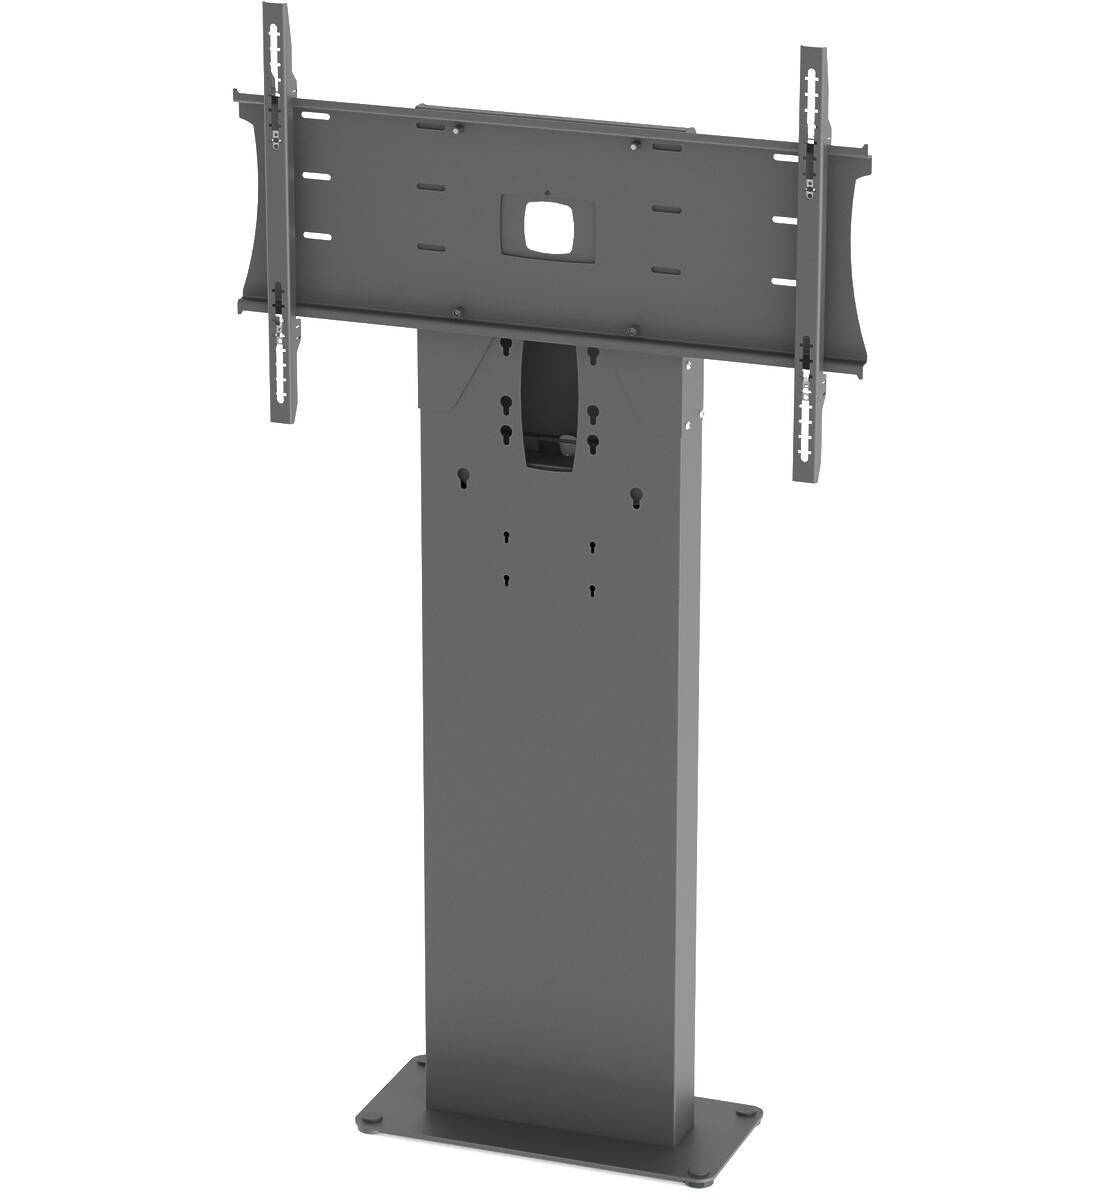 Unicol RHBD100-HD Rhobus Heavy Duty bolt down stand for large format displays from 71-110" product image. Click to enlarge.